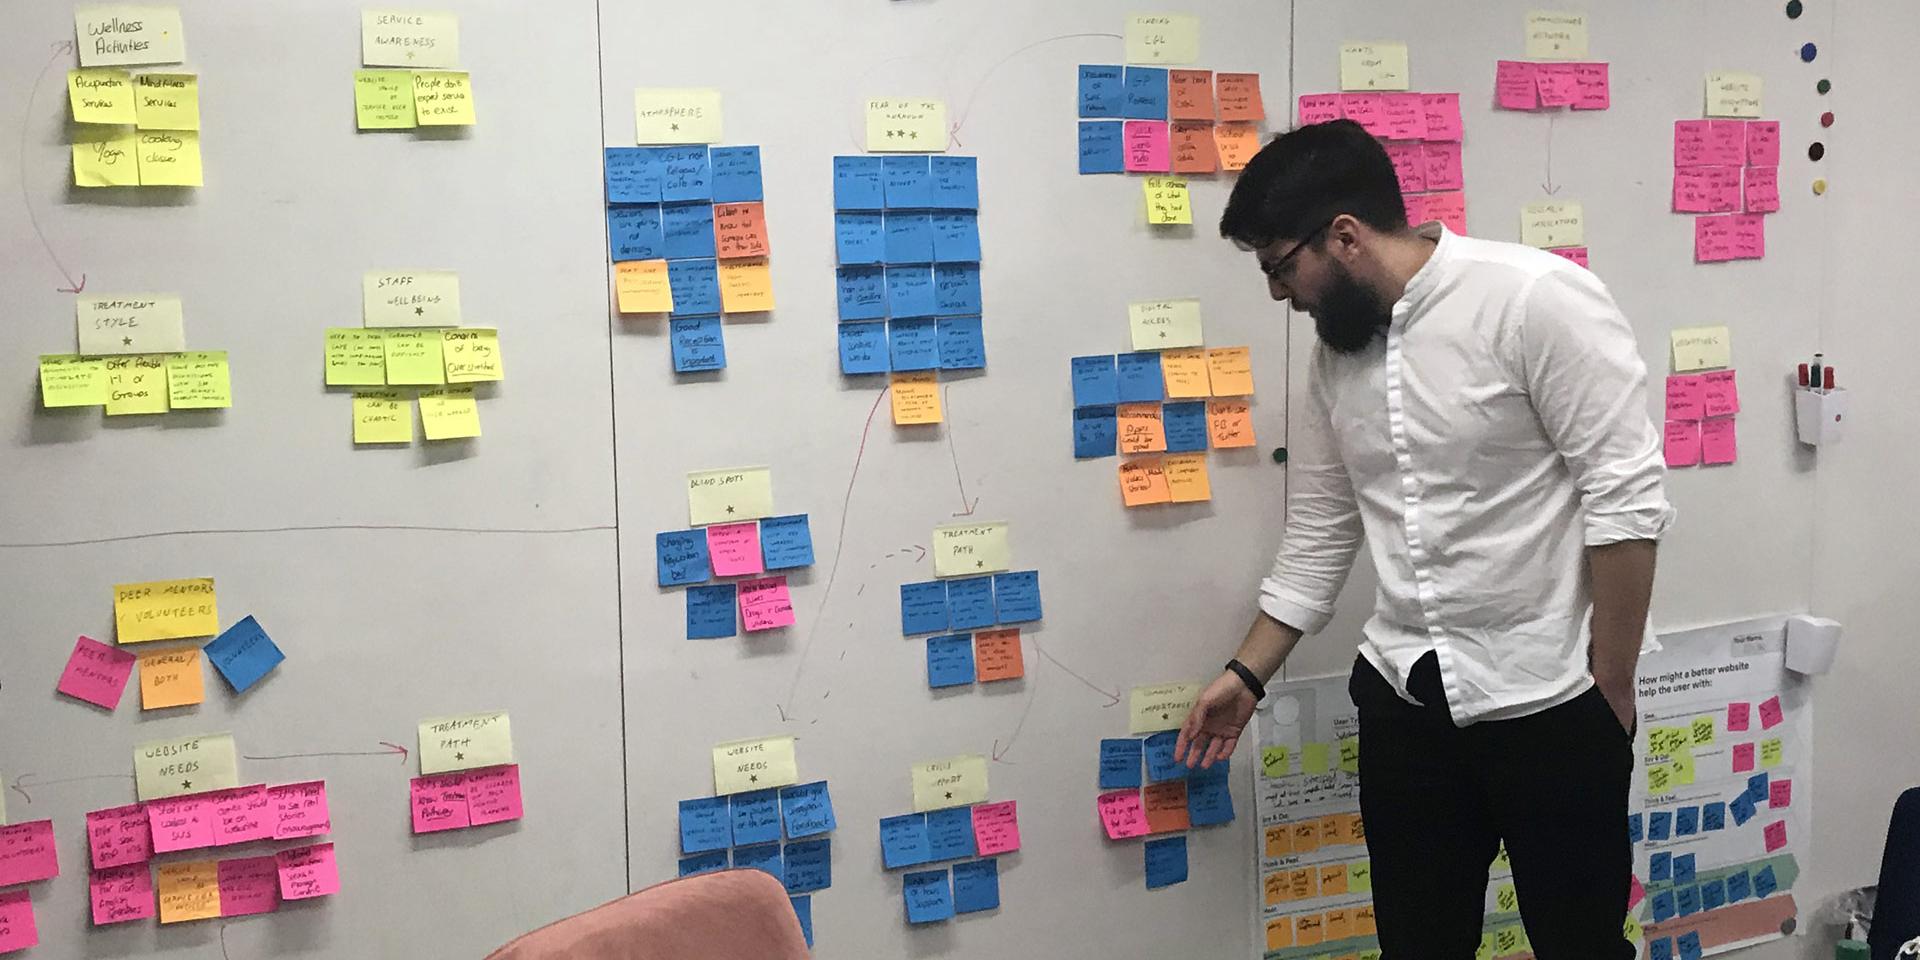 a man standing pointing at some post-it notes on a wall